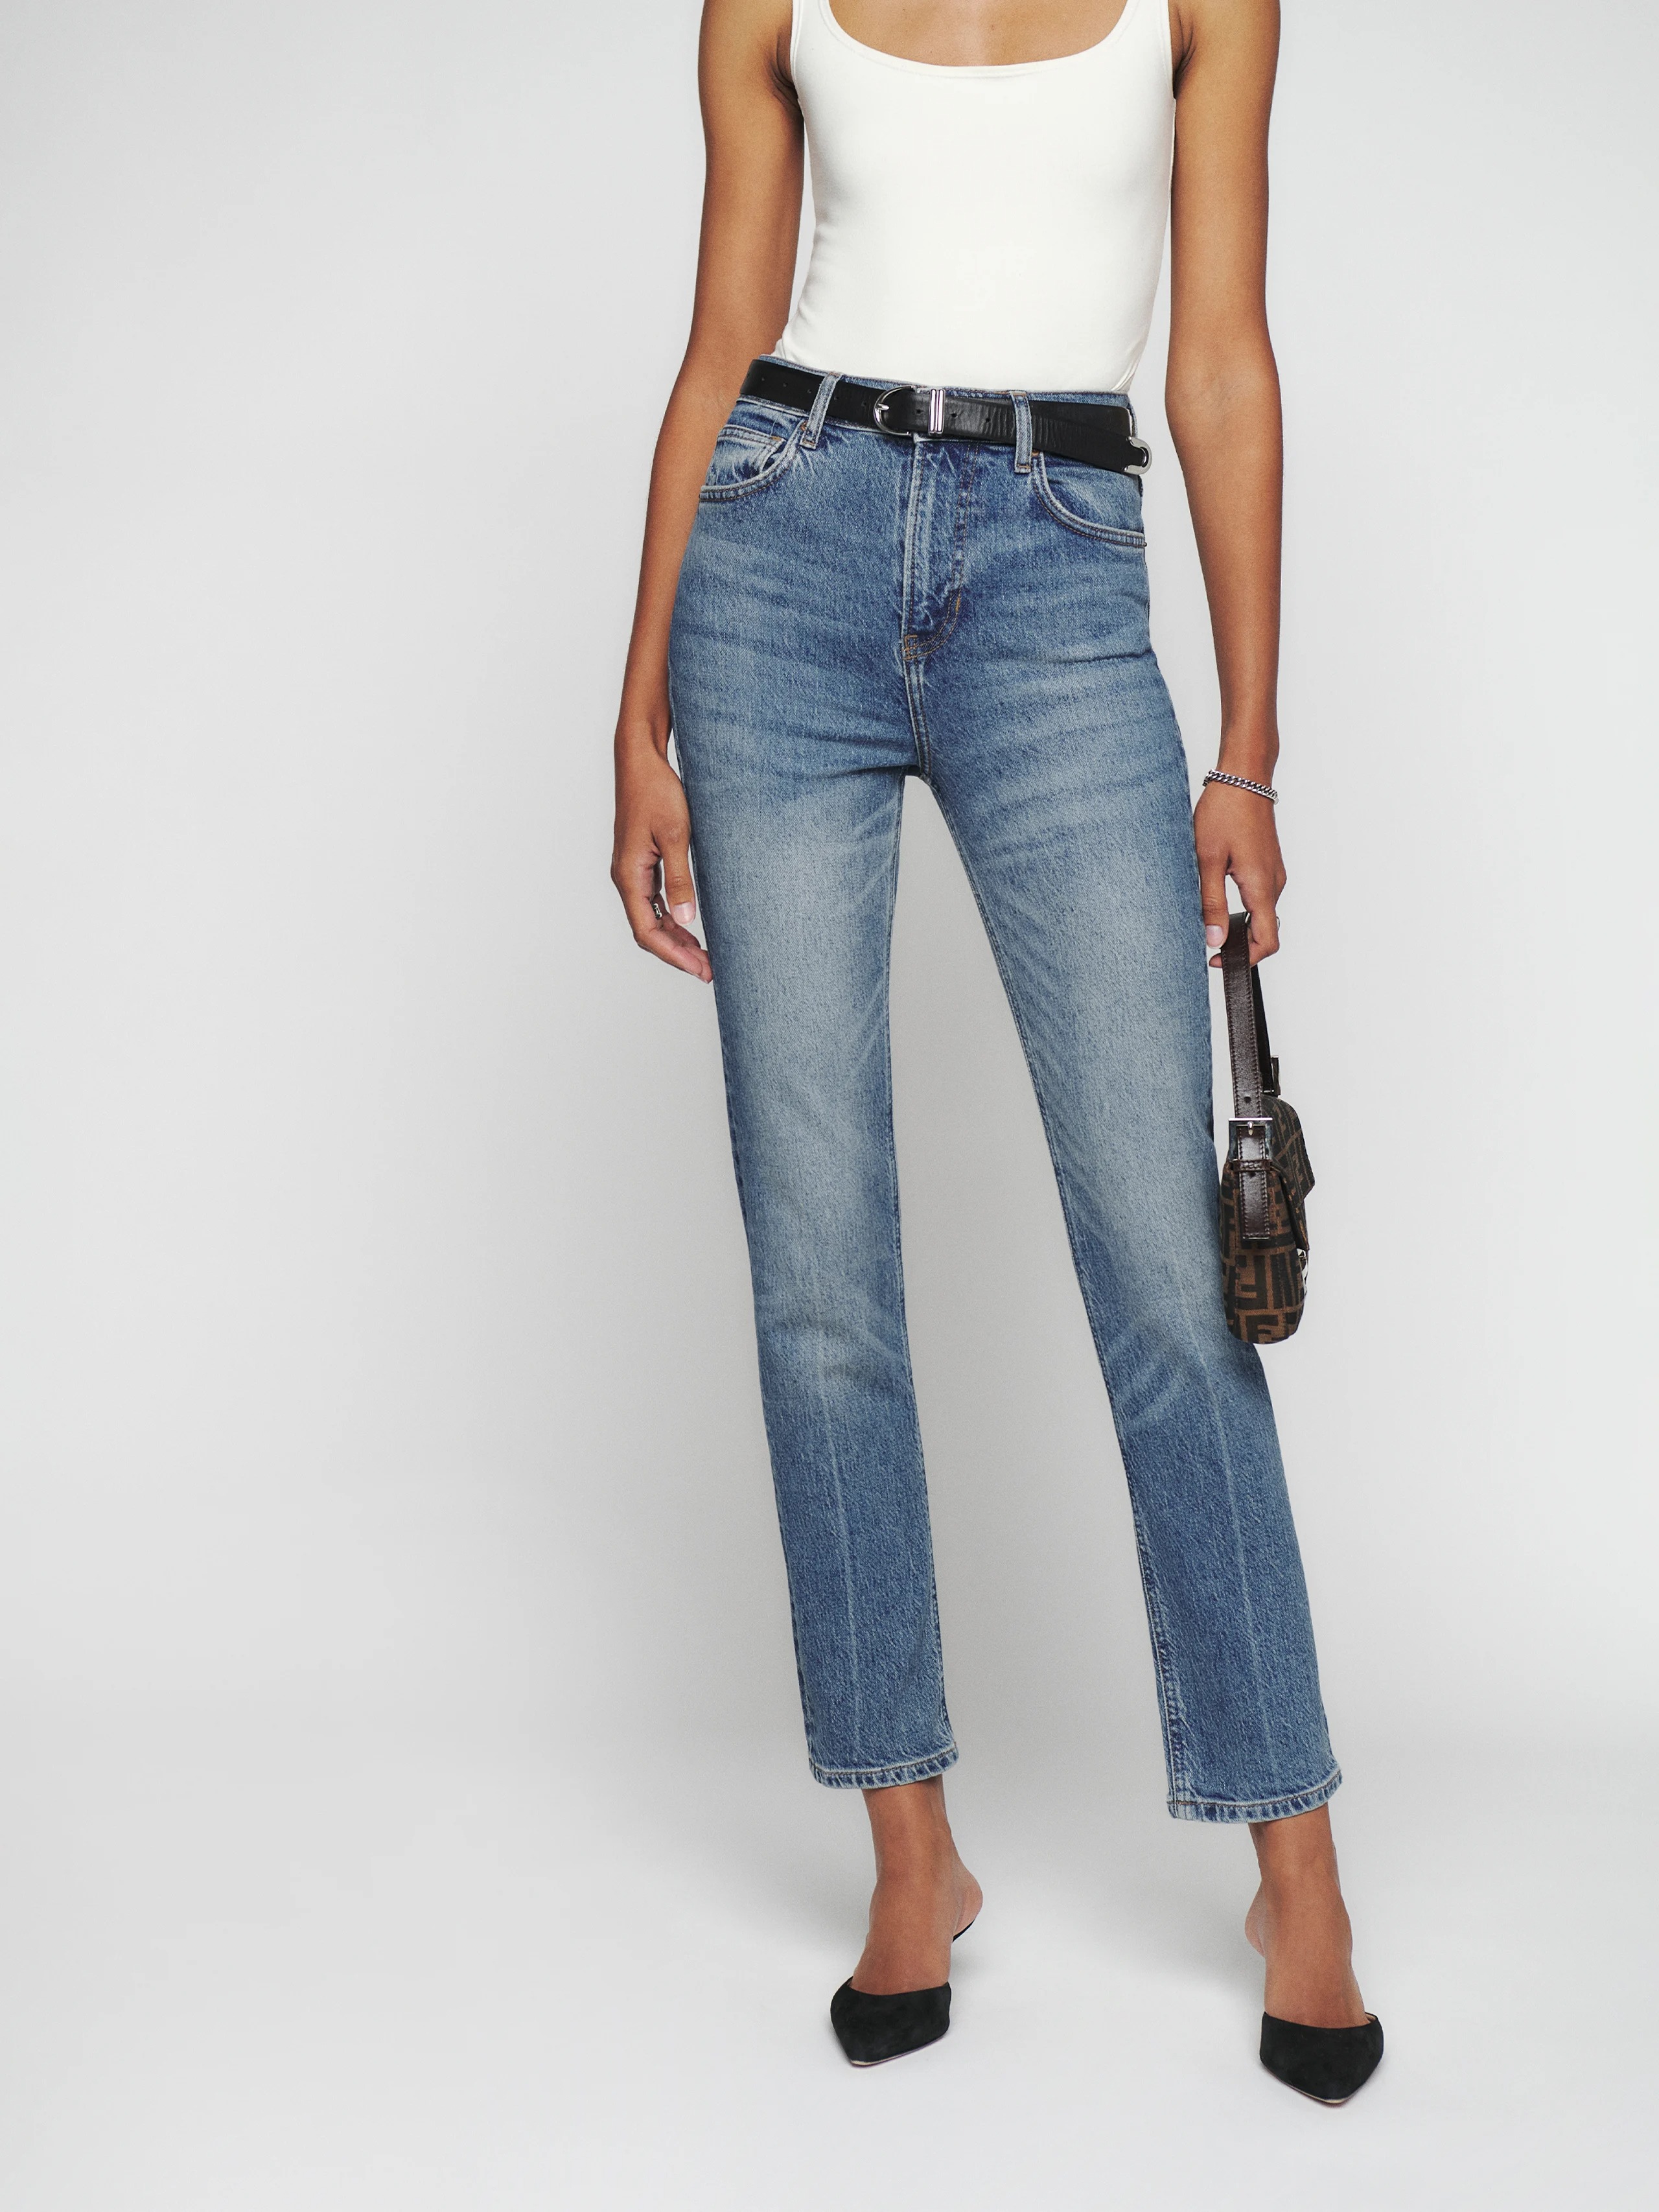 9 Outfits That Prove Skinny Jeans Are Coming Back | Who What Wear